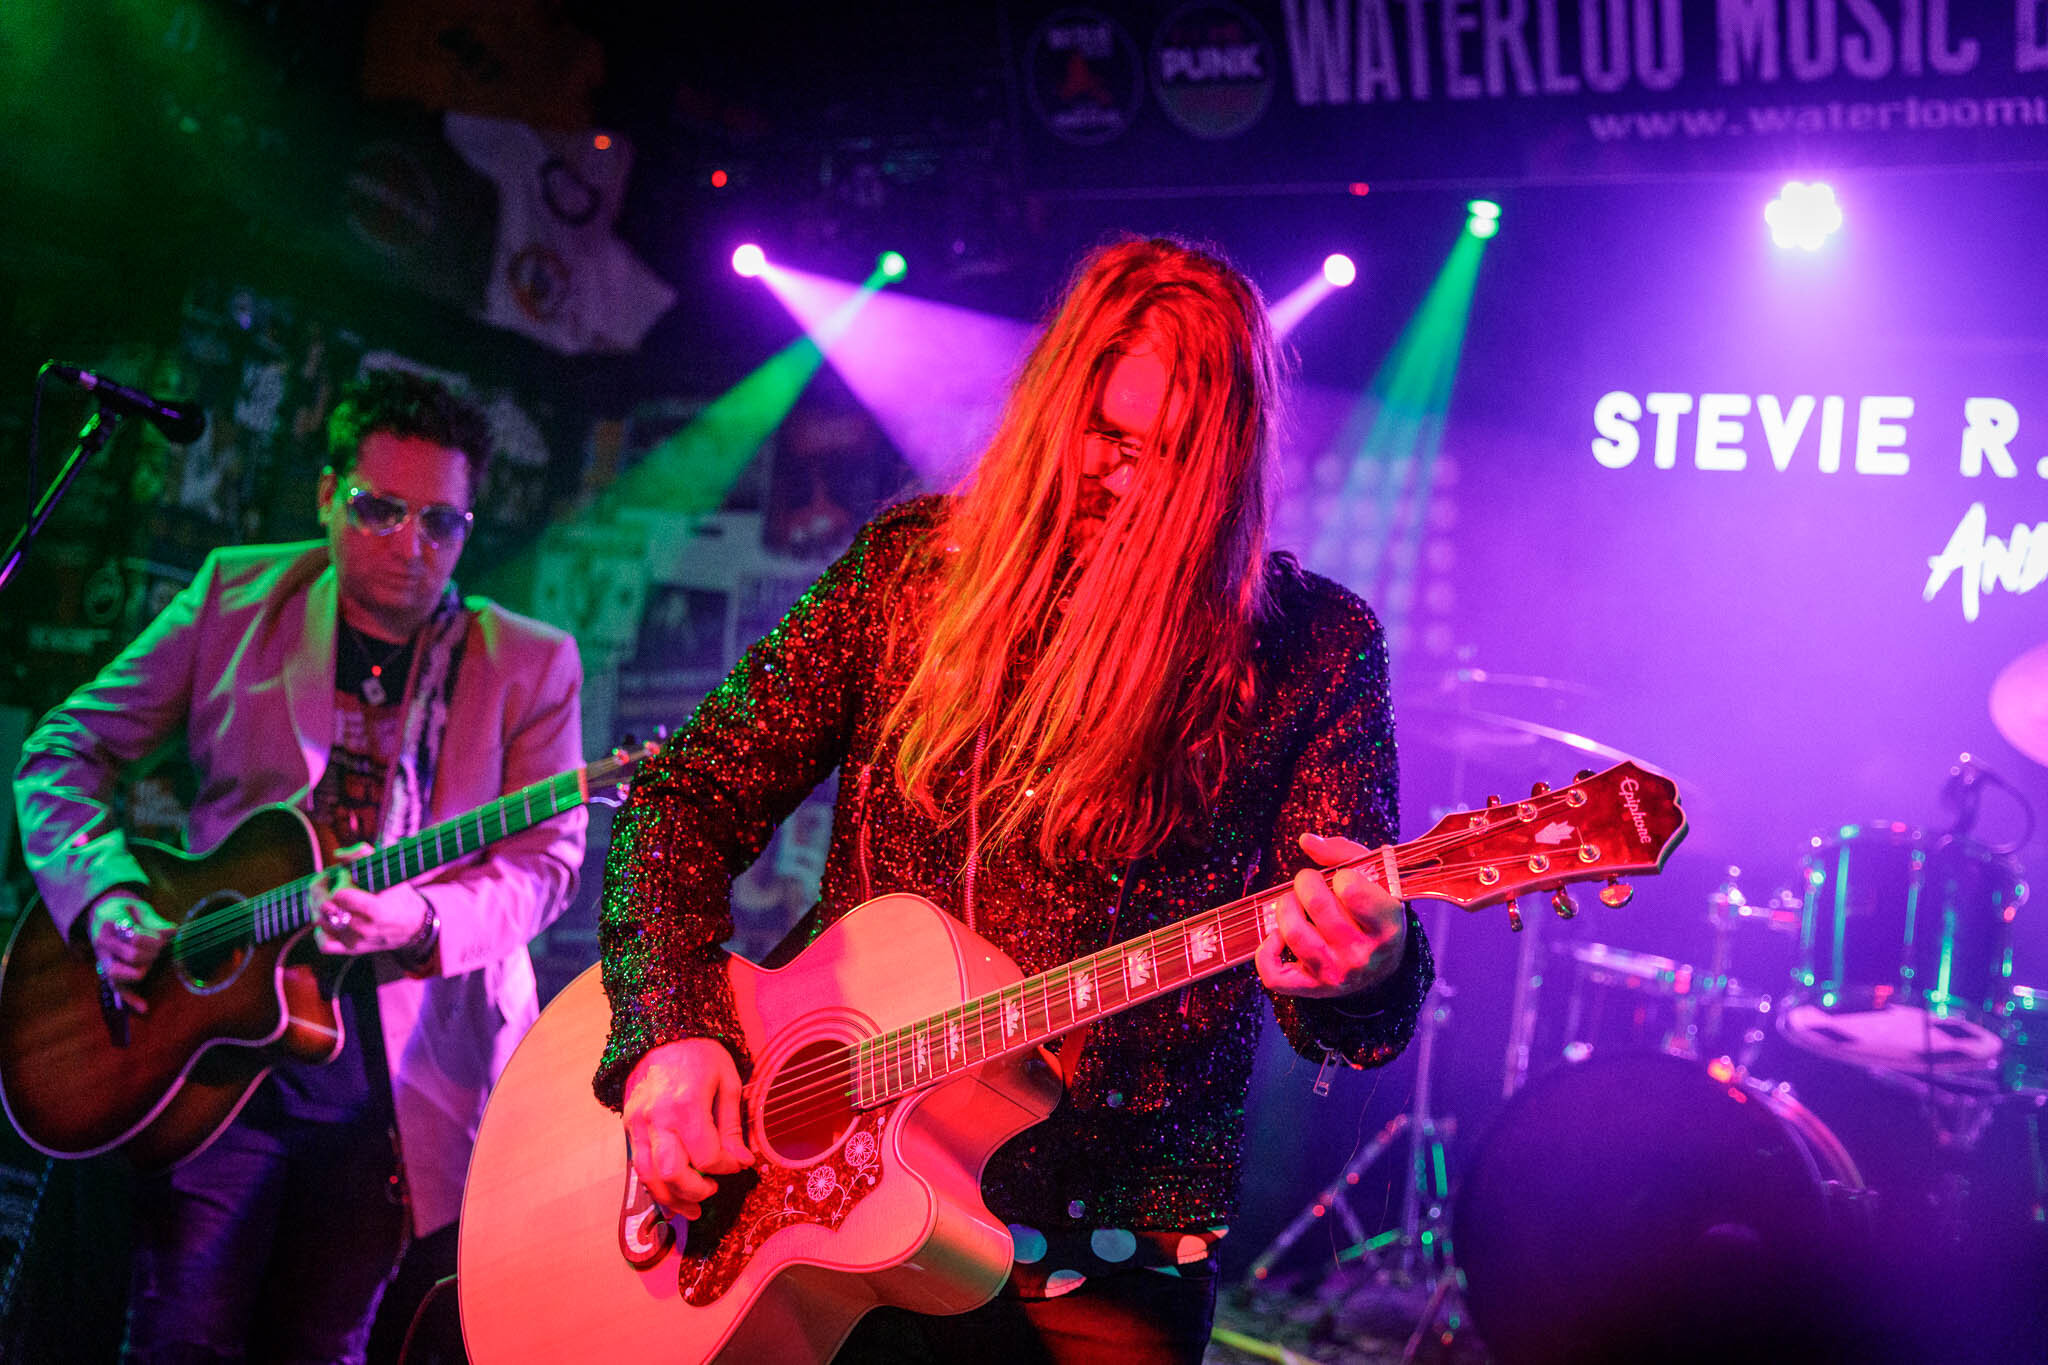 Stevie R. Pearce & The Hooligans at The Waterloo Music Bar in Bl